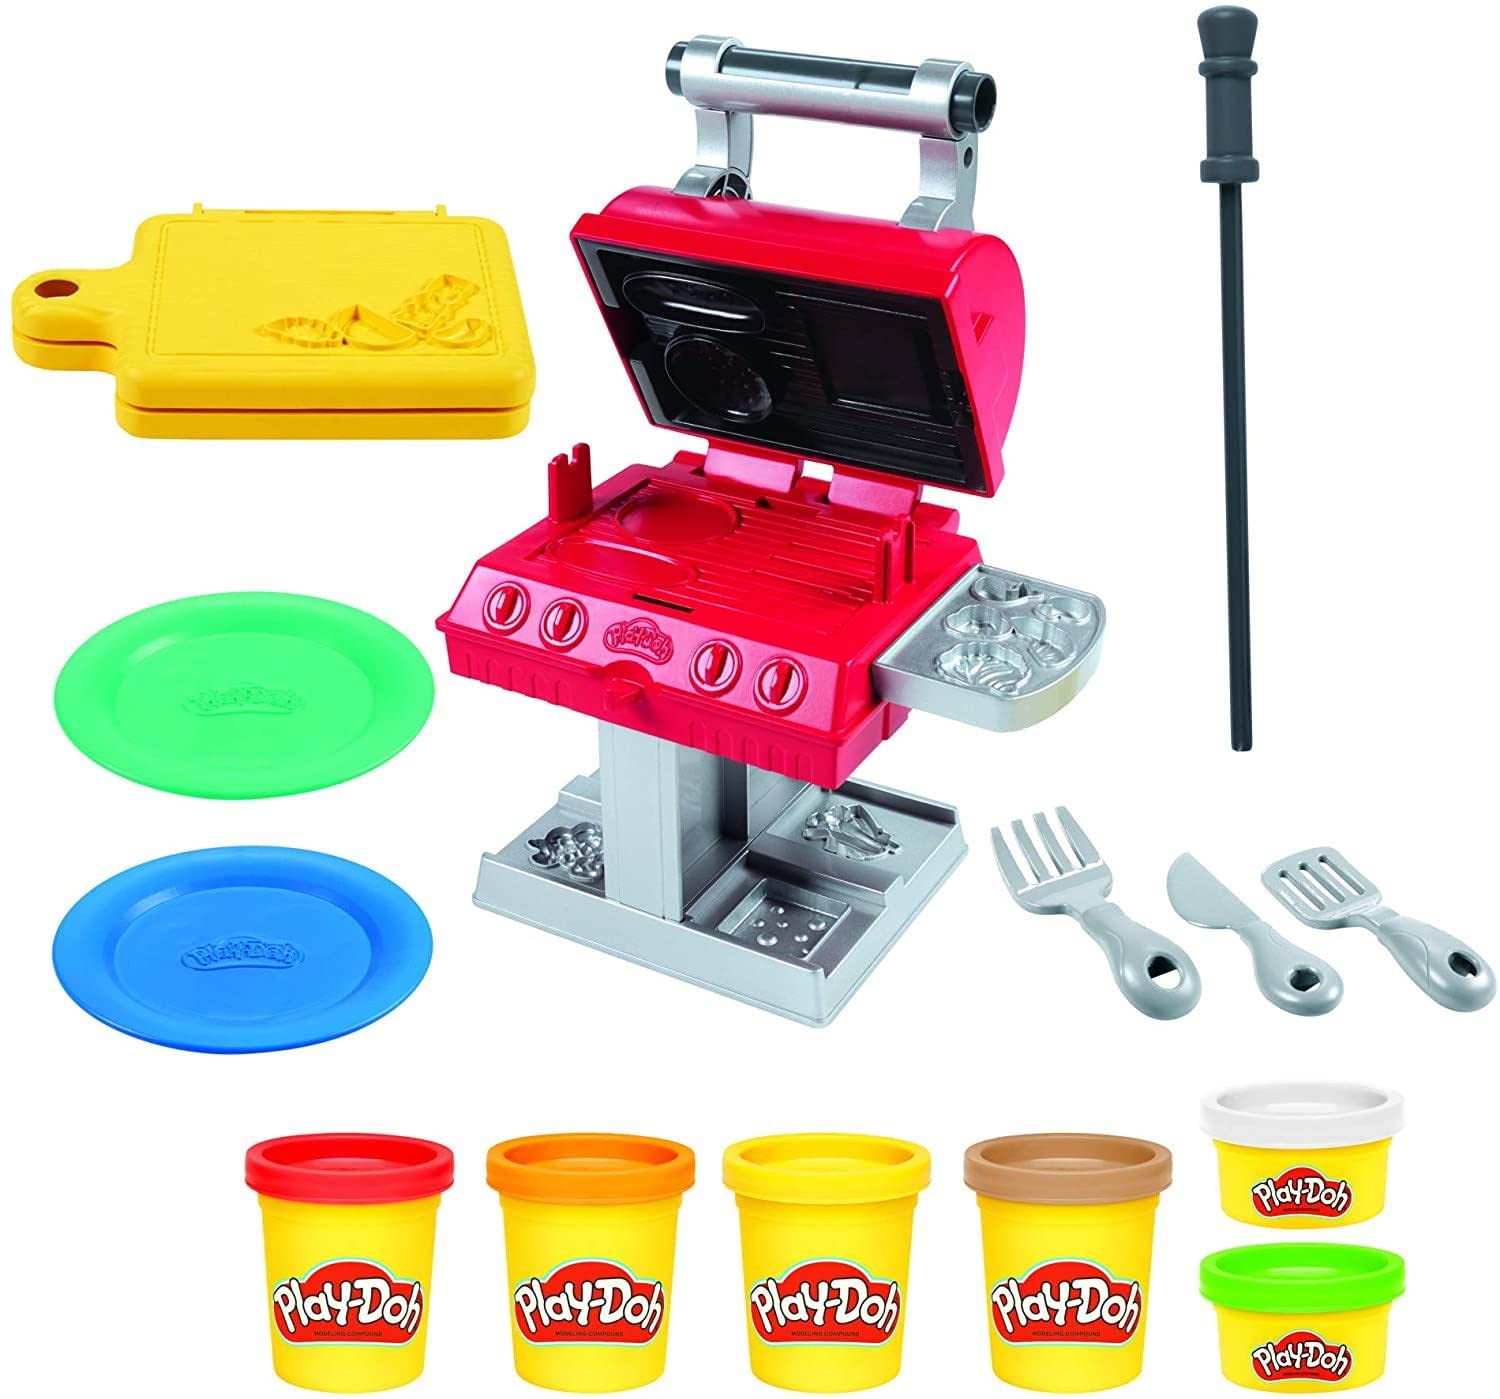 Play-Doh Kitchen Creations Grill N Stamp Playset For Kids 3 Years And Up With 6 Non-Toxic Modeling Compound Colors And 7 Barbecu